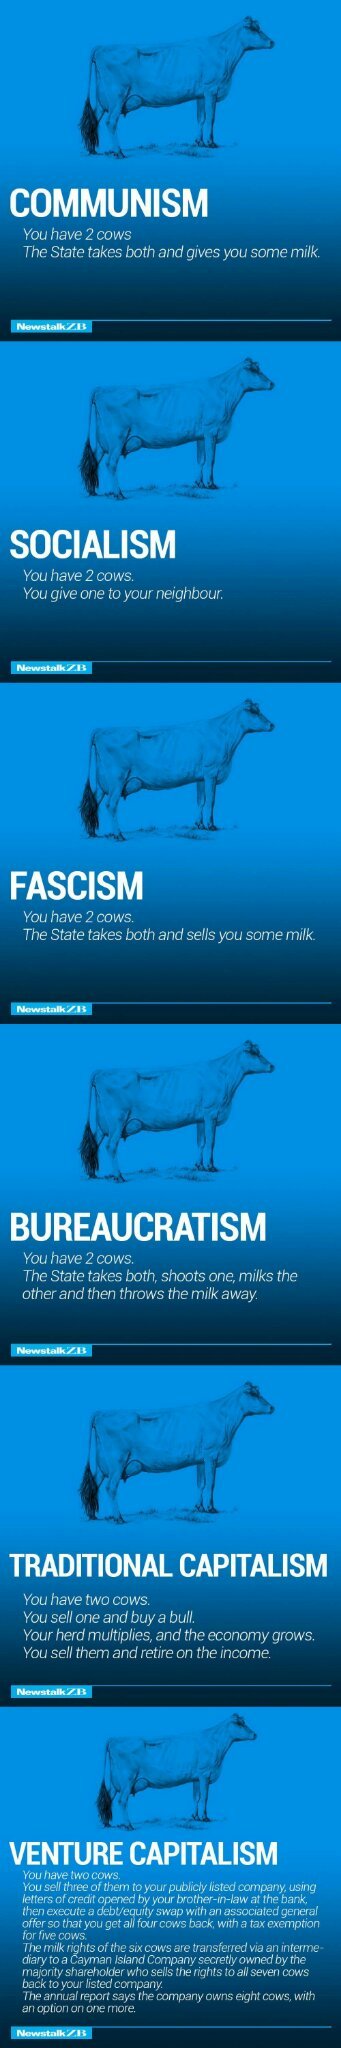 Economy explained with cows 01/03 - meme